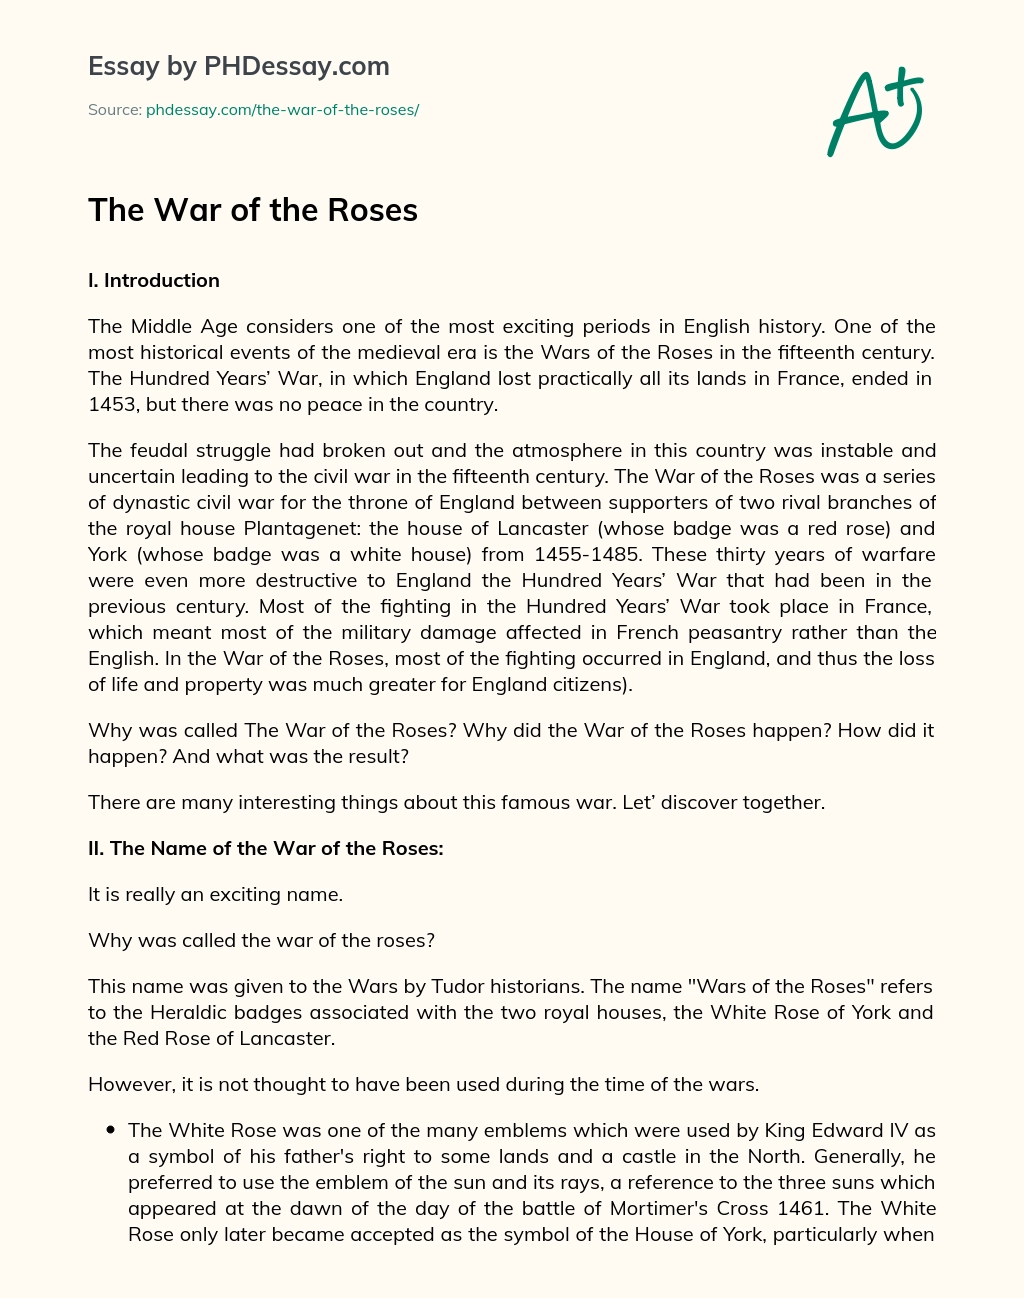 The War of the Roses essay